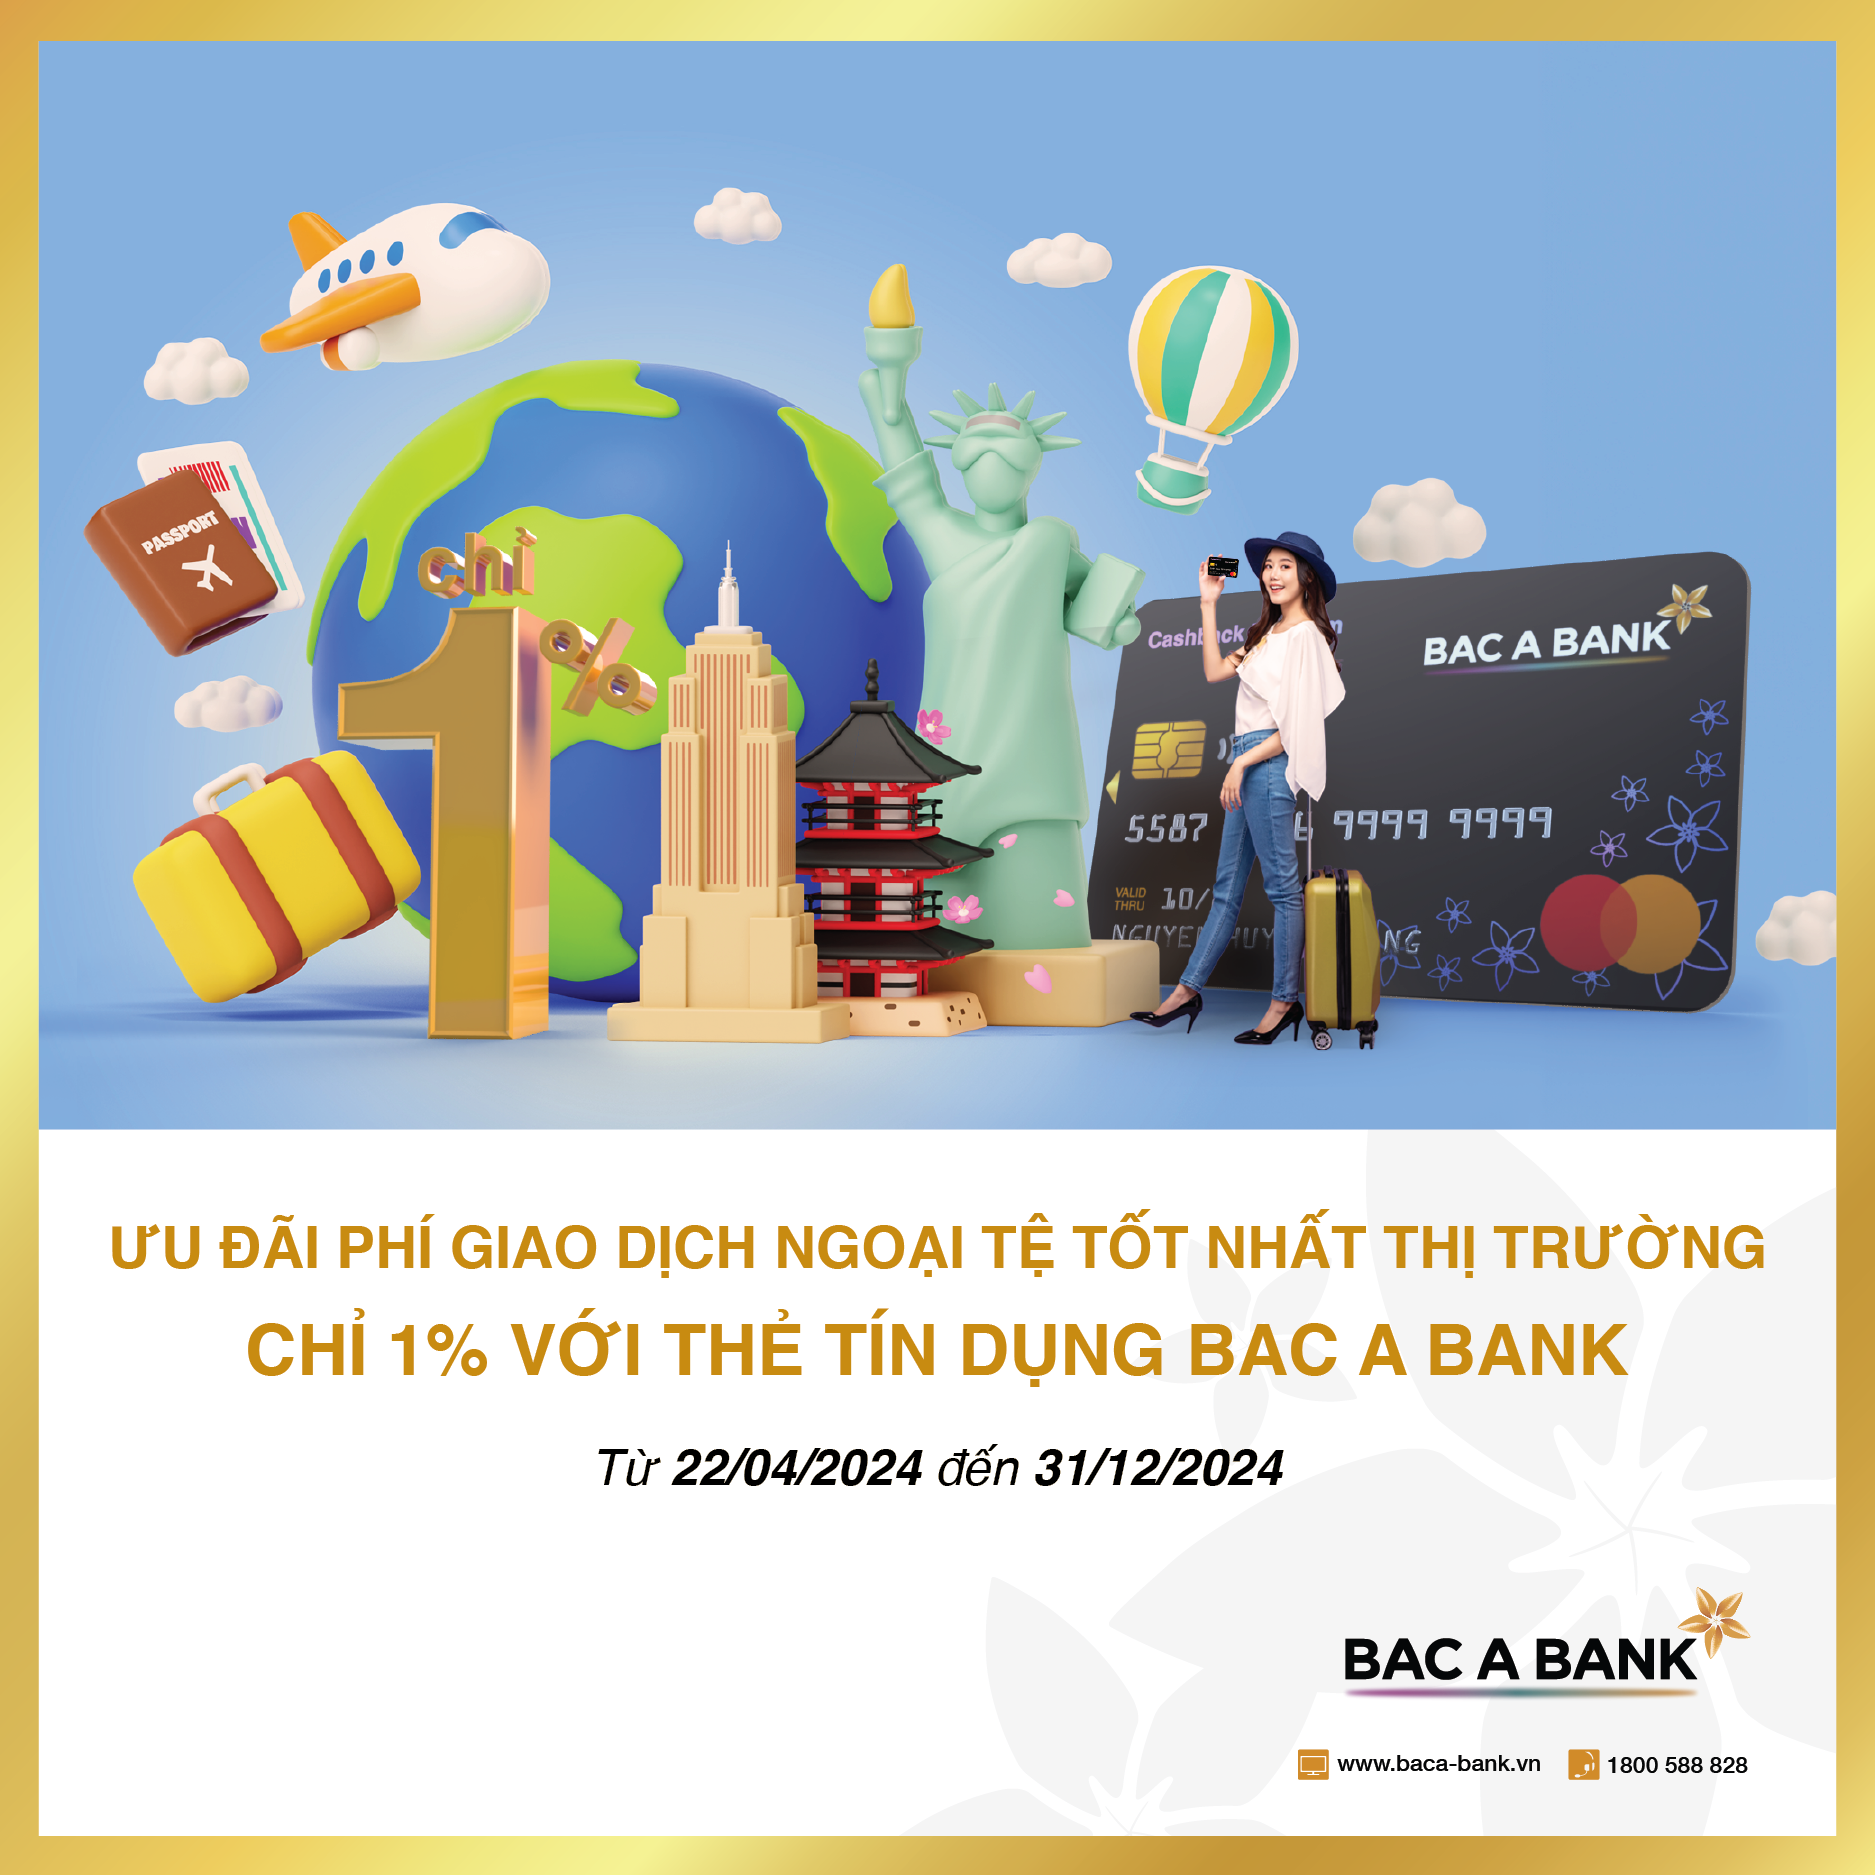 Bac A Bank anh 2